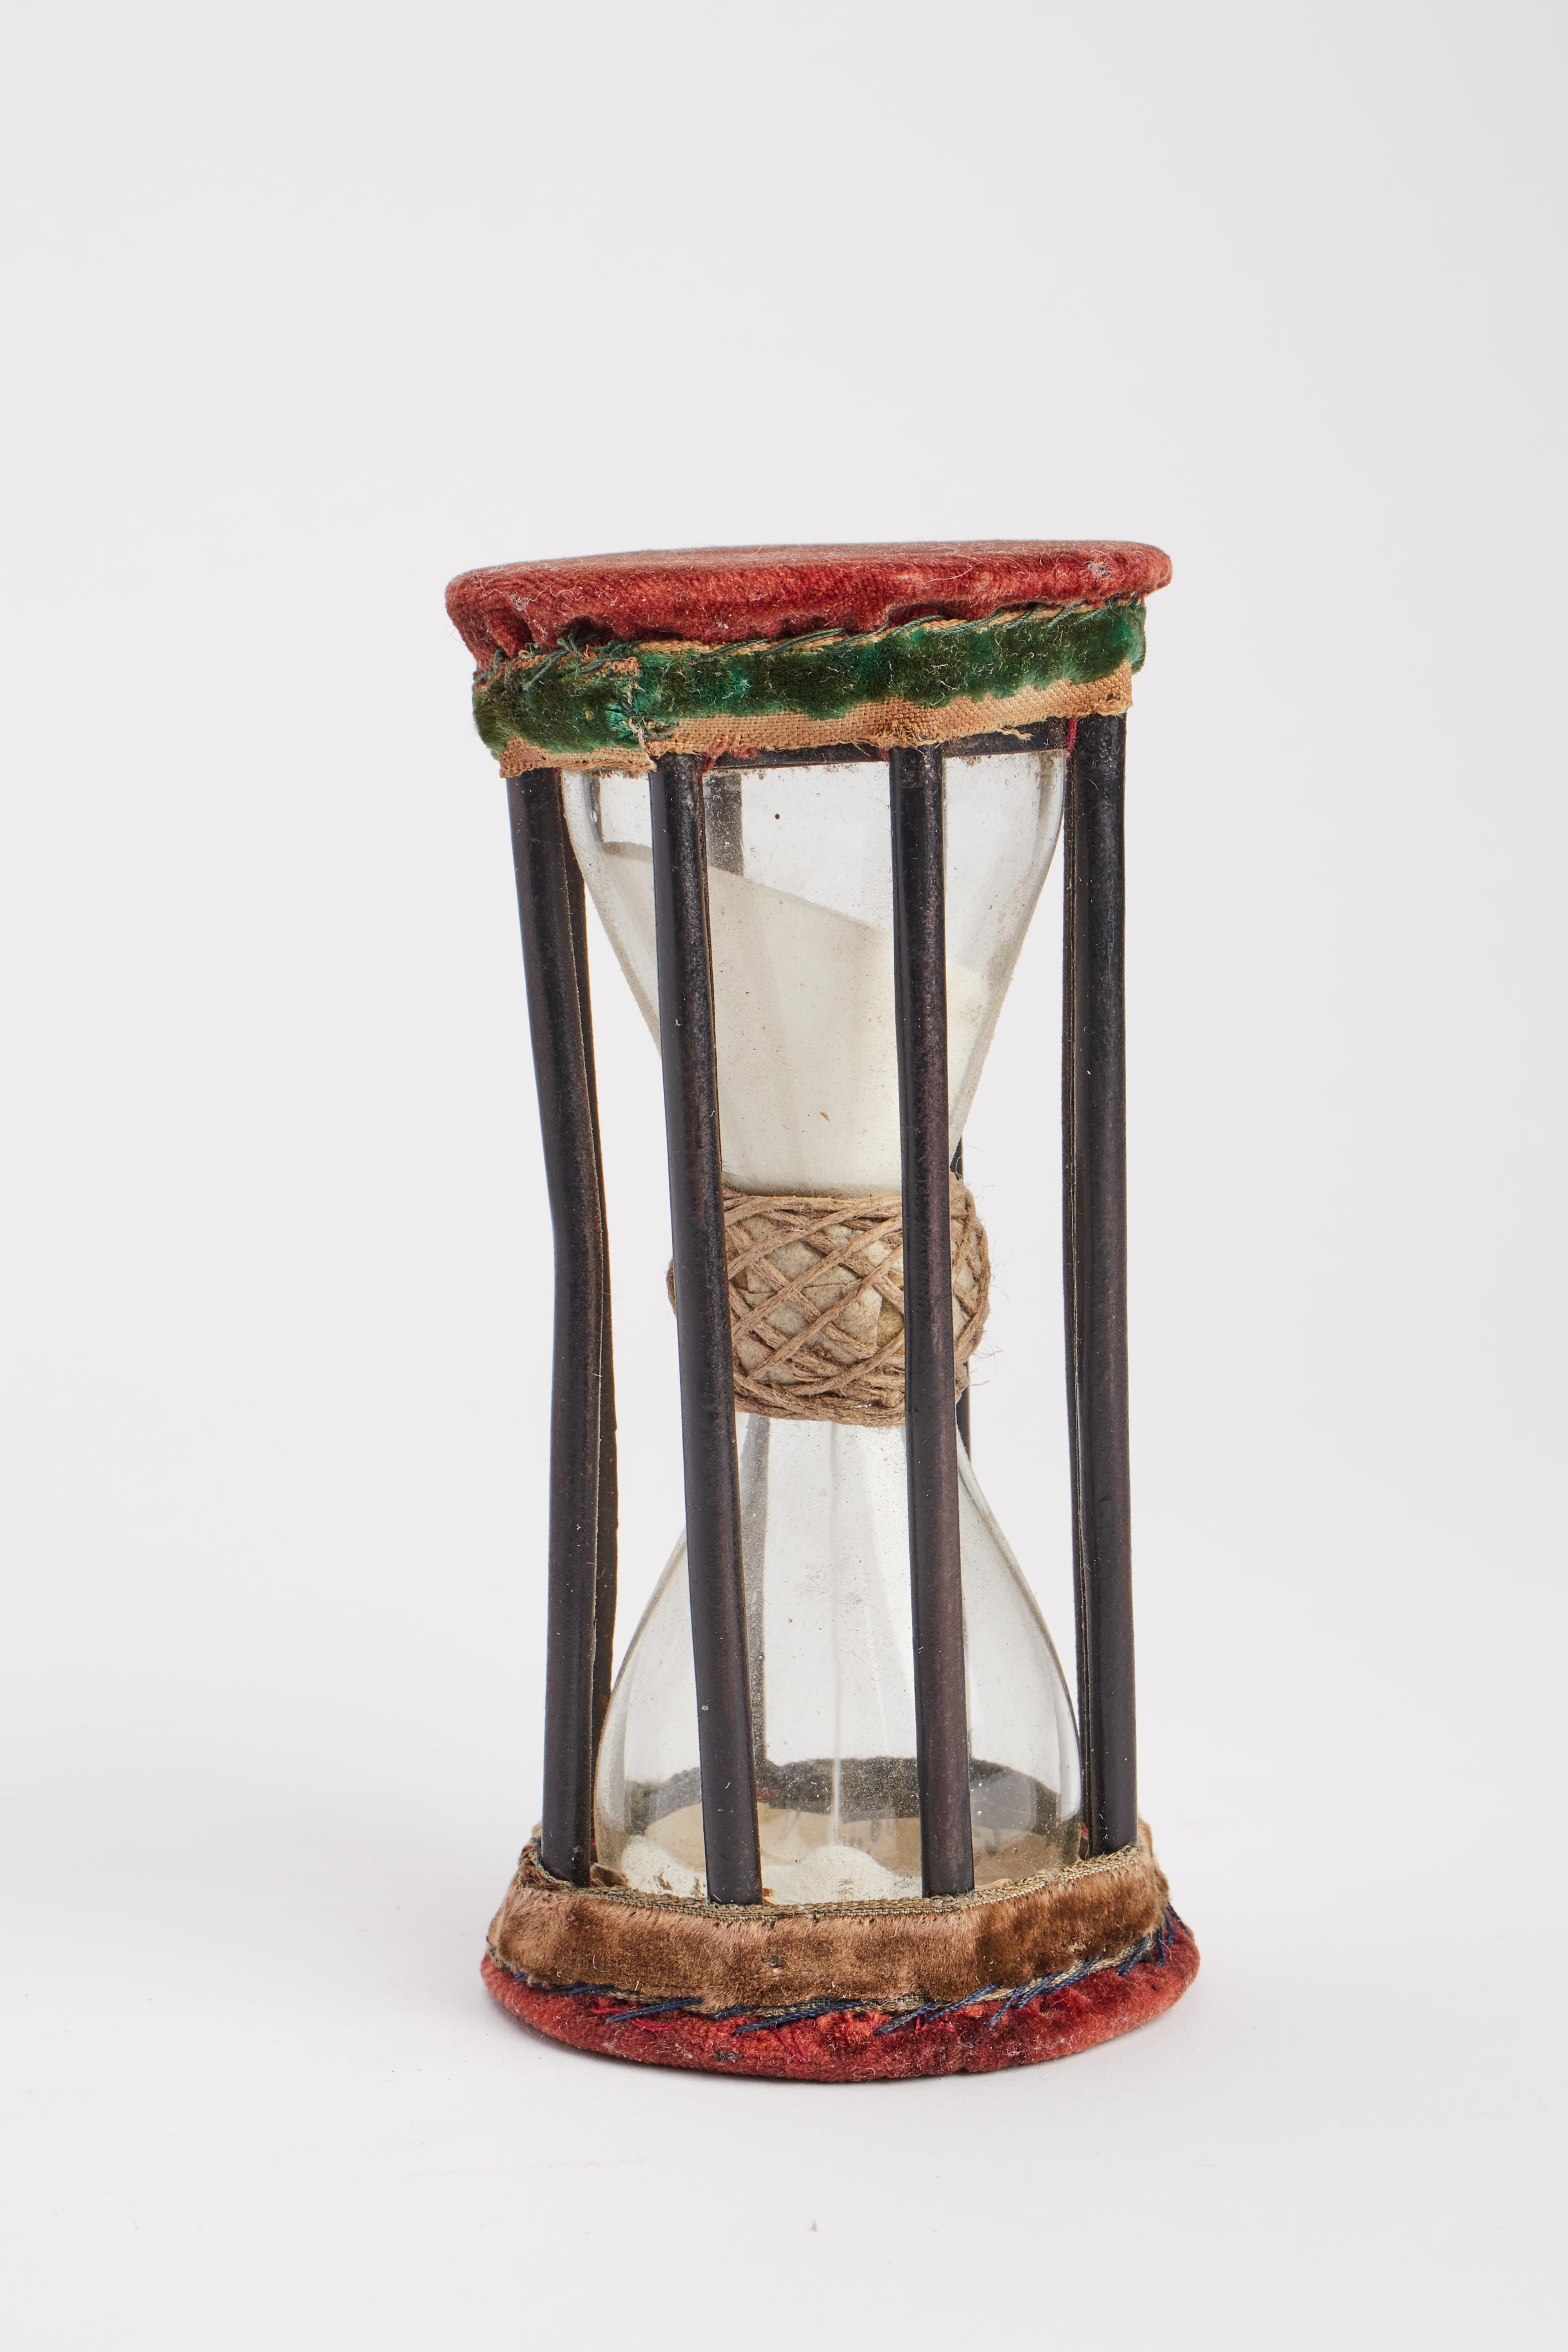 The hourglass cage displays octagonal bases, dressed in a red velvet cushion. Eight smooth iron columns complete the cage. Inside the glass bulbs joined in the center by a ring of fabric and rope. Germany early 1700s.